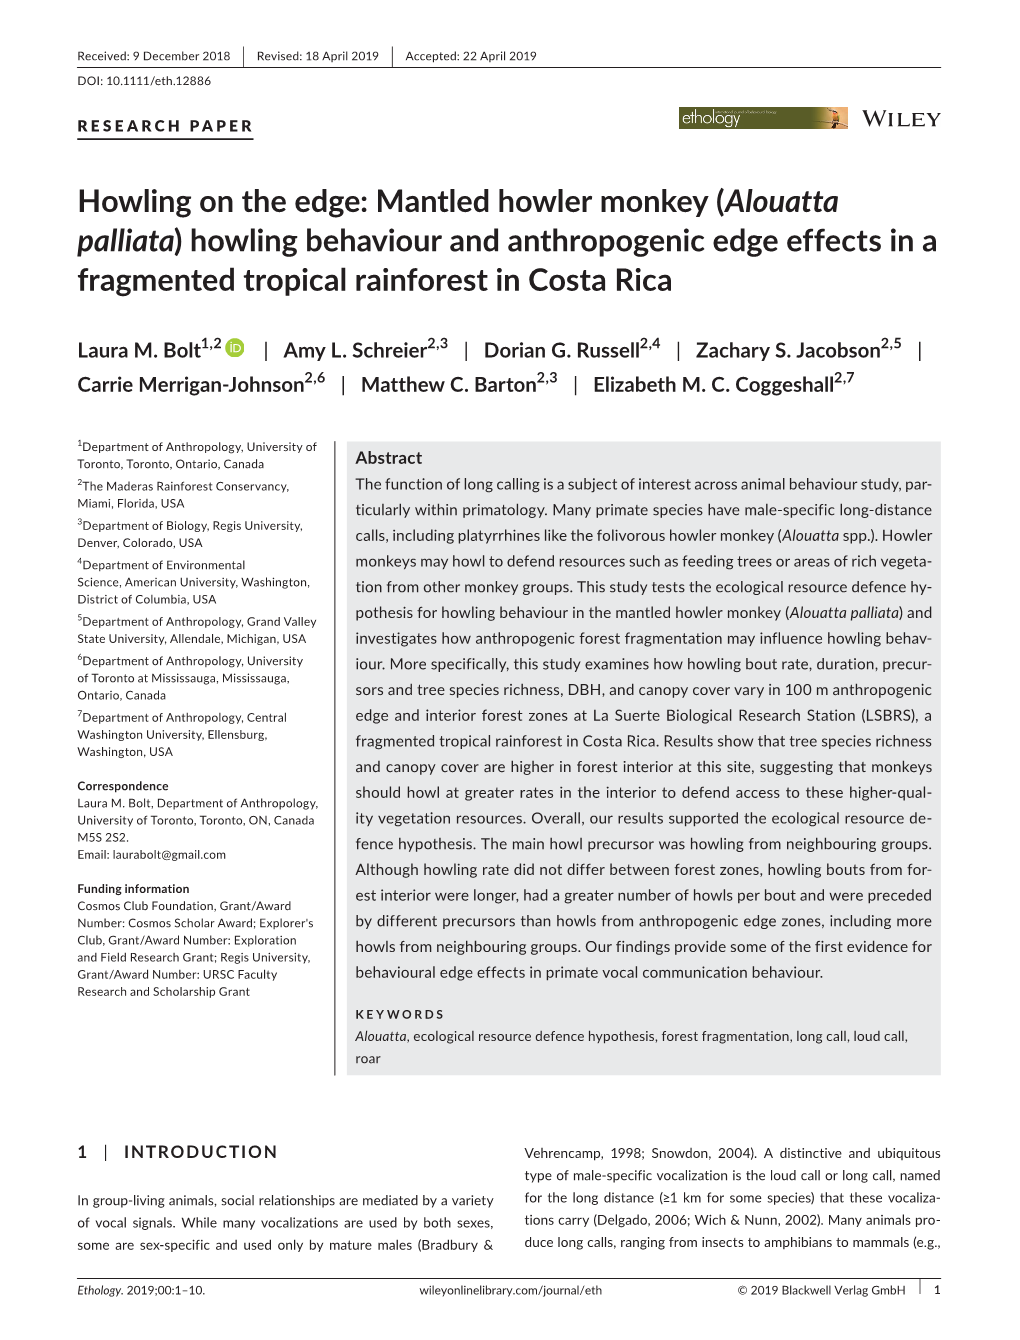 Howling on the Edge: Mantled Howler Monkey (Alouatta Palliata) Howling Behaviour and Anthropogenic Edge Effects in a Fragmented Tropical Rainforest in Costa Rica